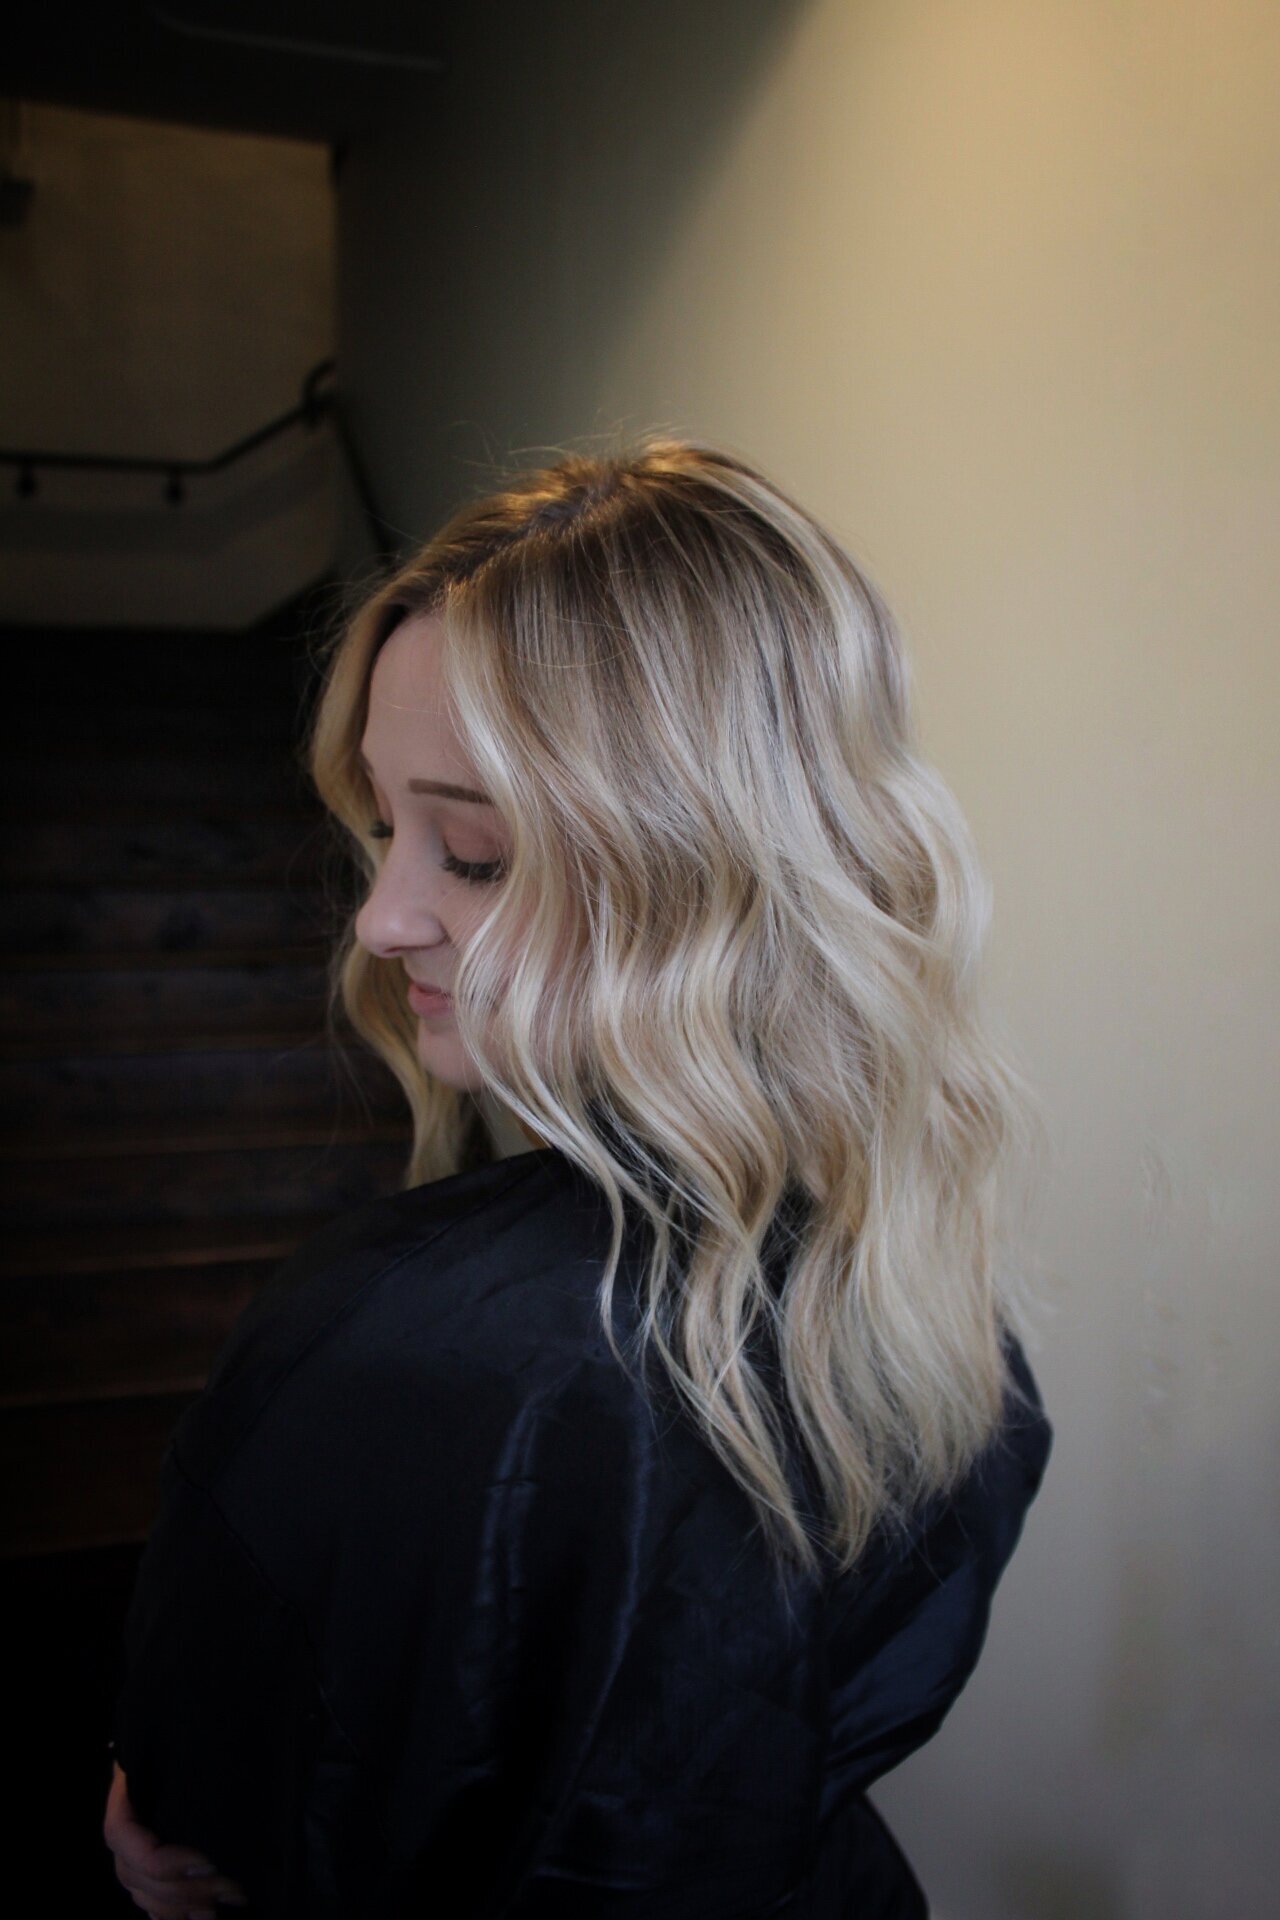 Our satisfied client with blonde wavy hair looking down, showing off her hairstyle